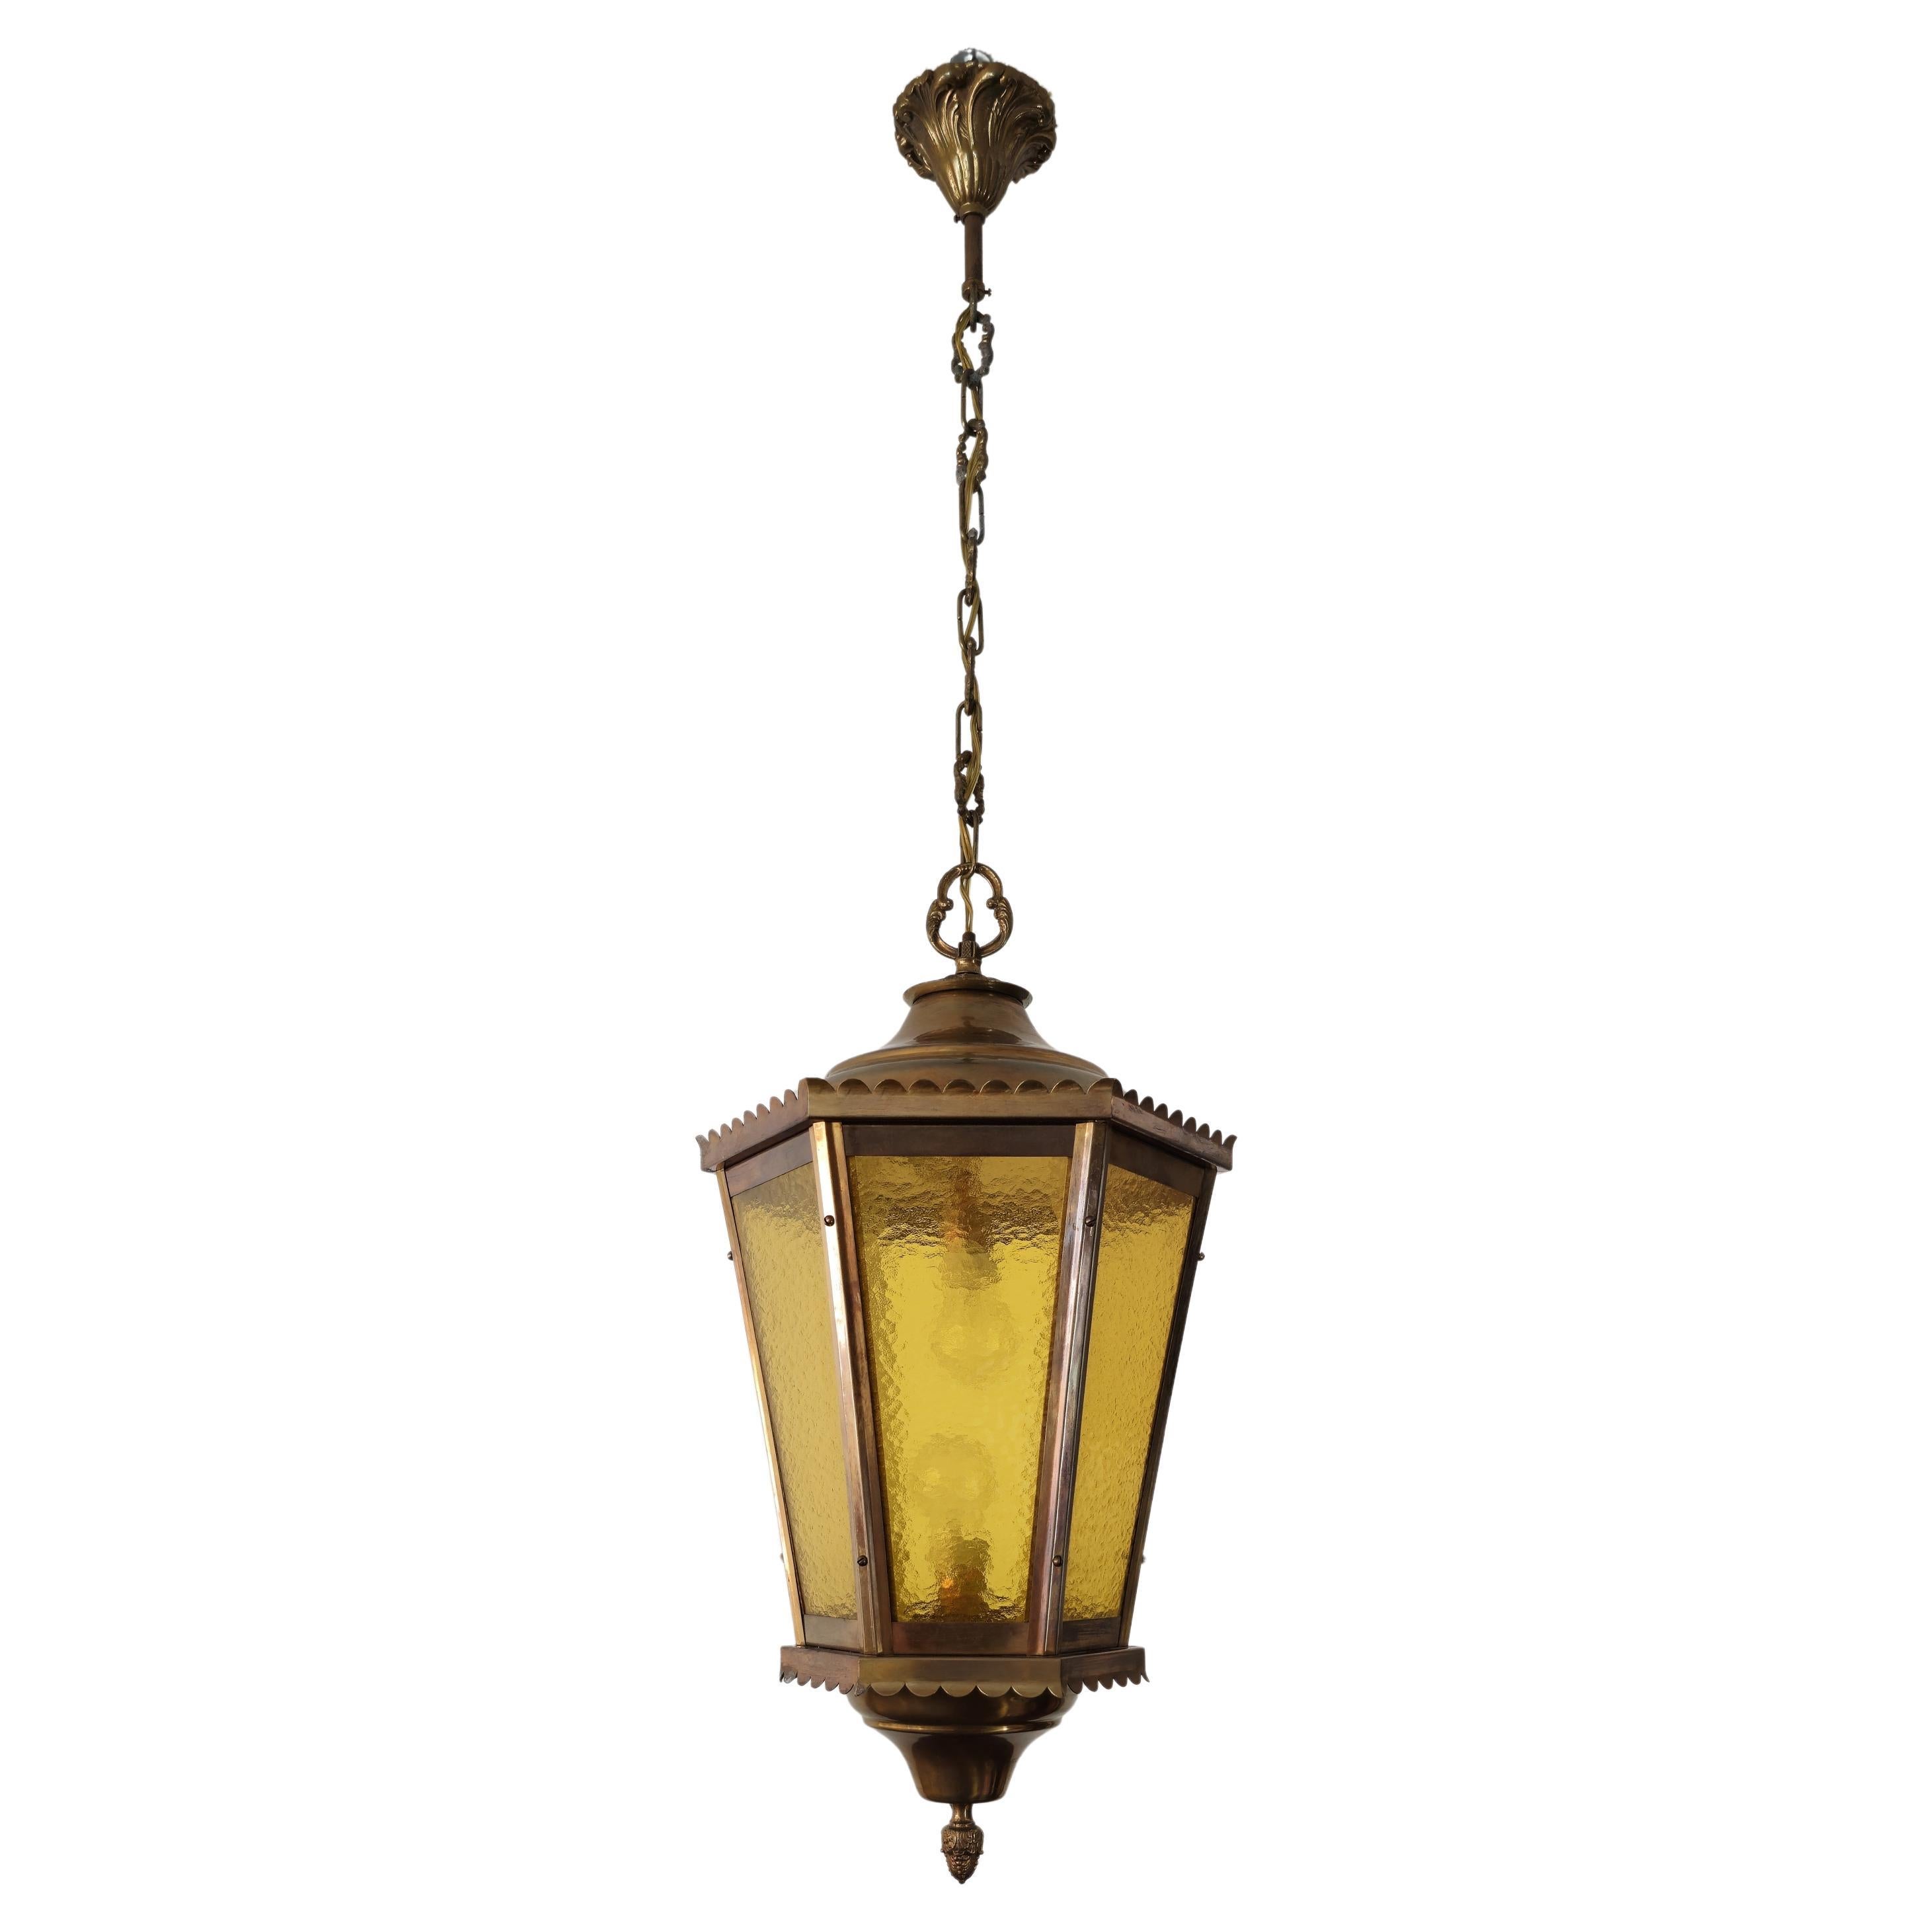  Pendant Lantern Suspension Lamp Brass Glass Cathedral Midcentury Italy 1940s For Sale